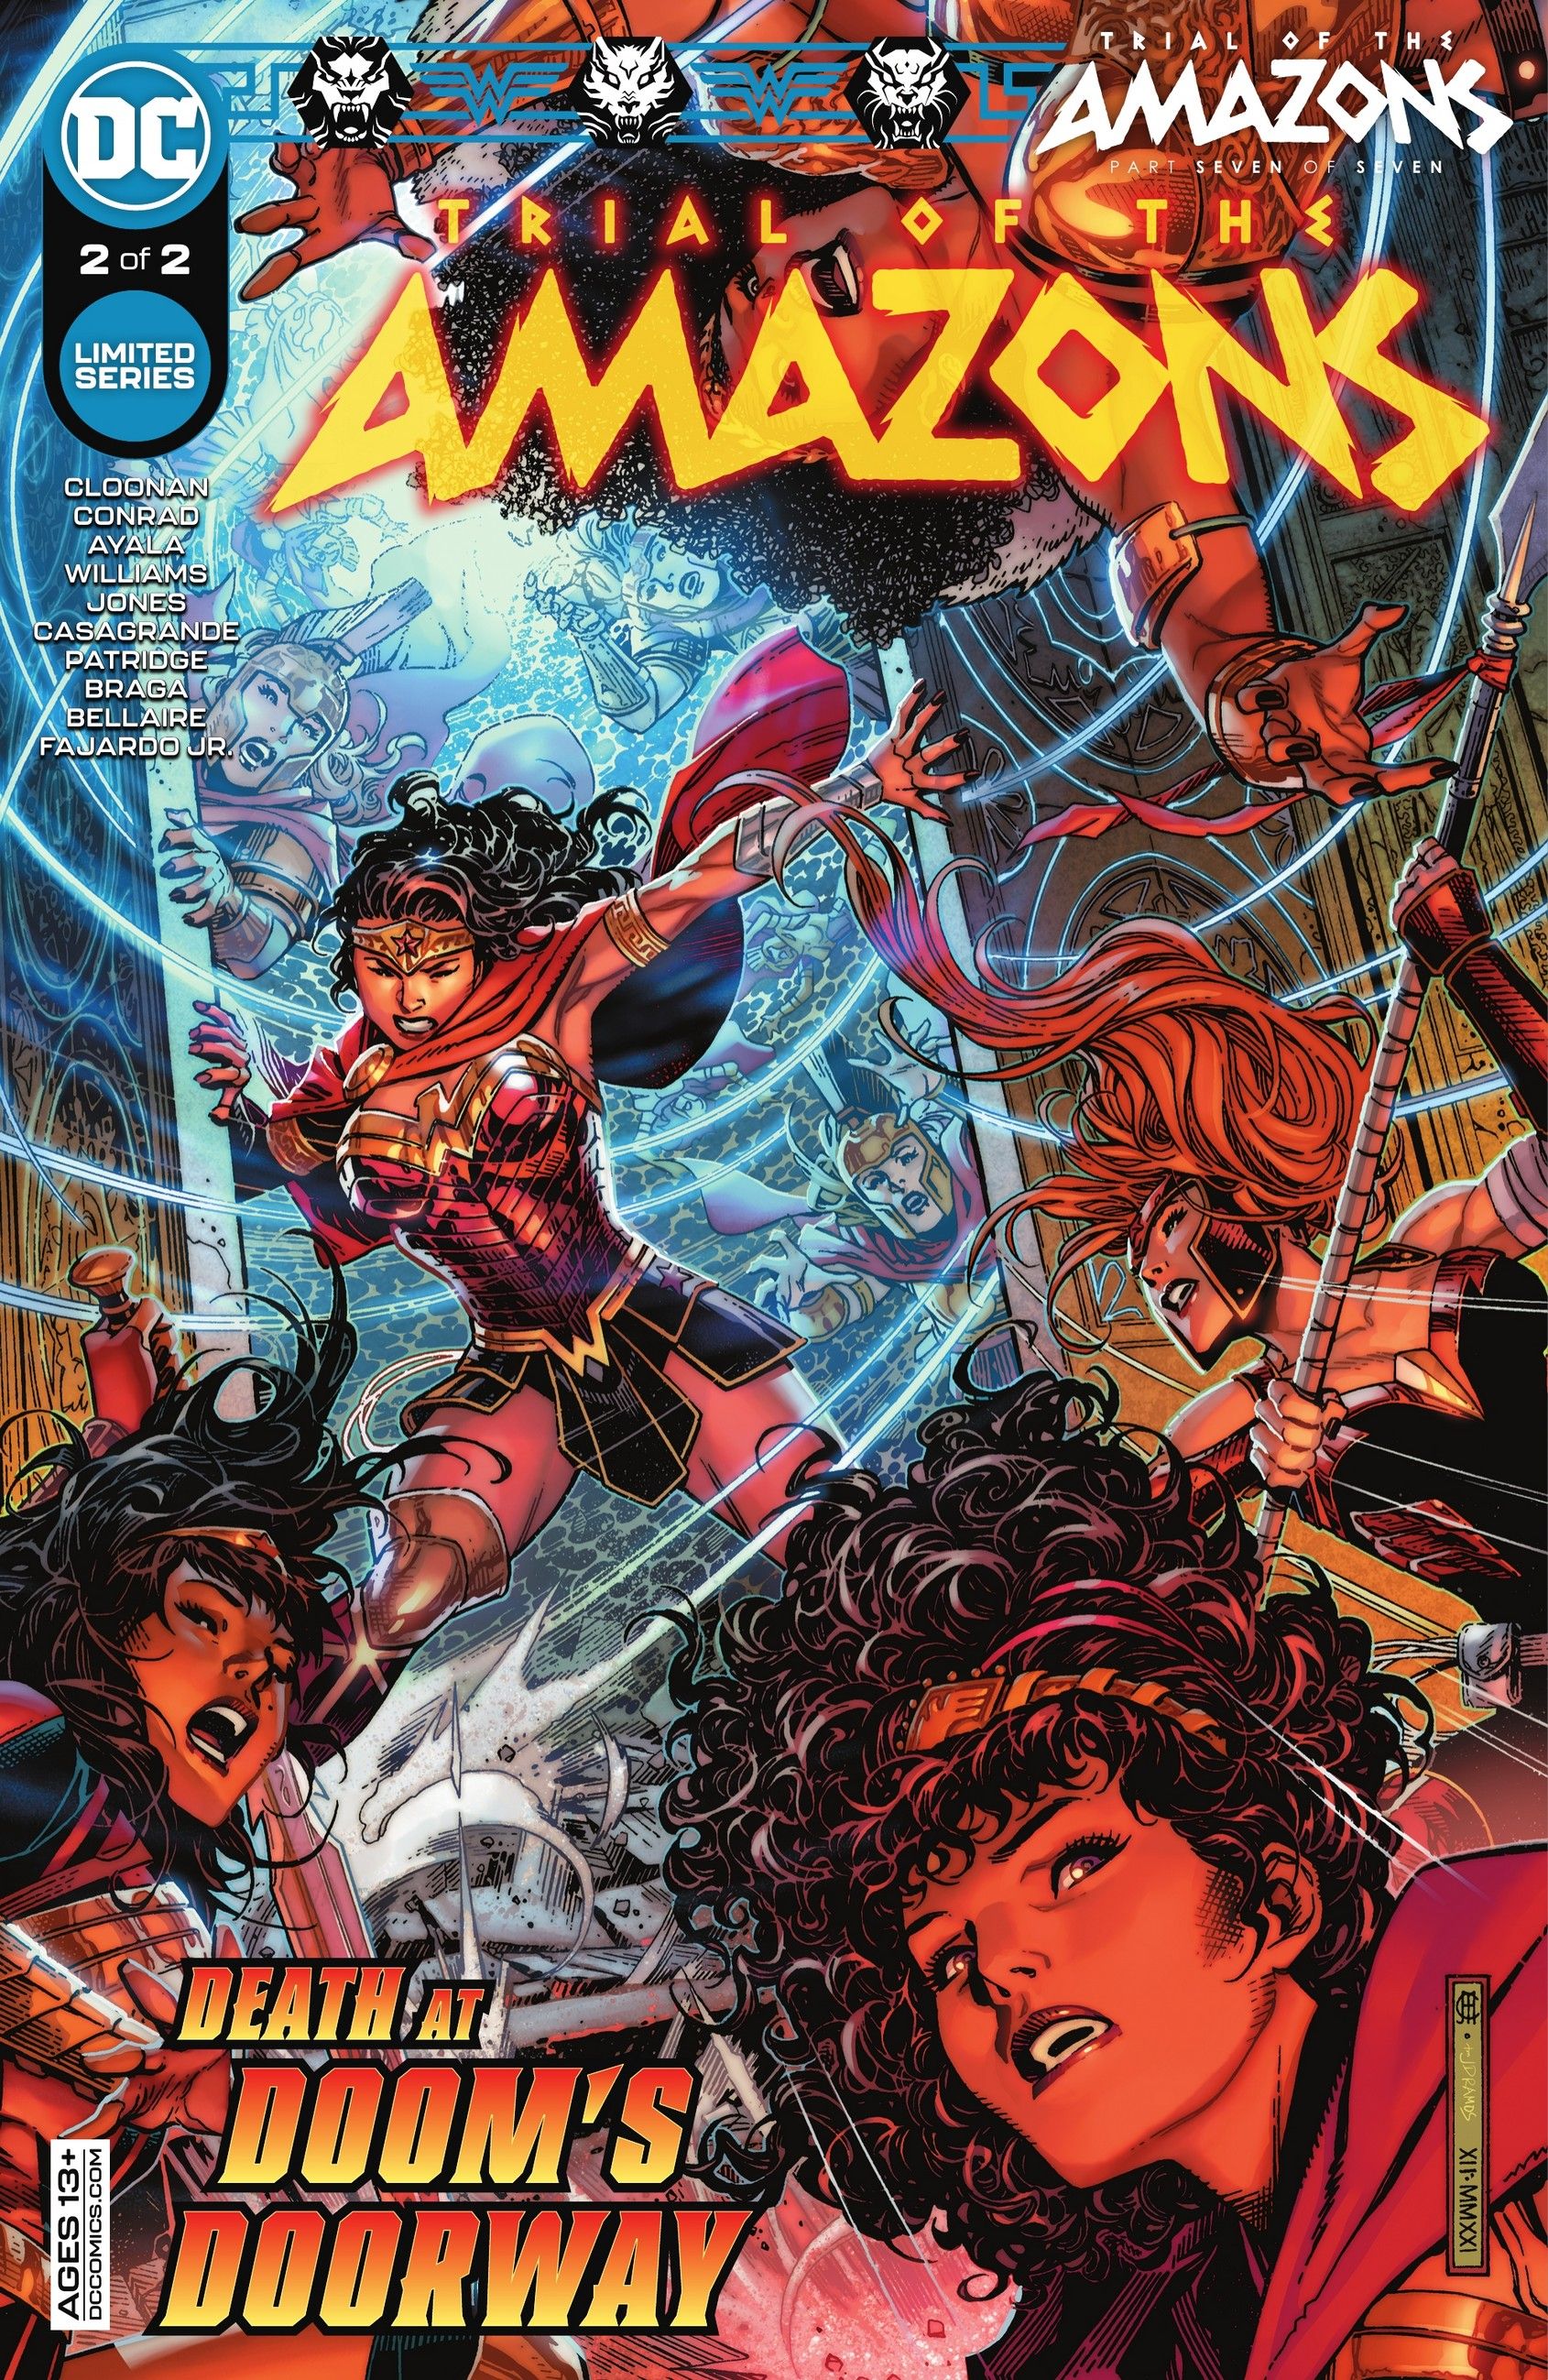 Cover of Trial of the Amazons #2 